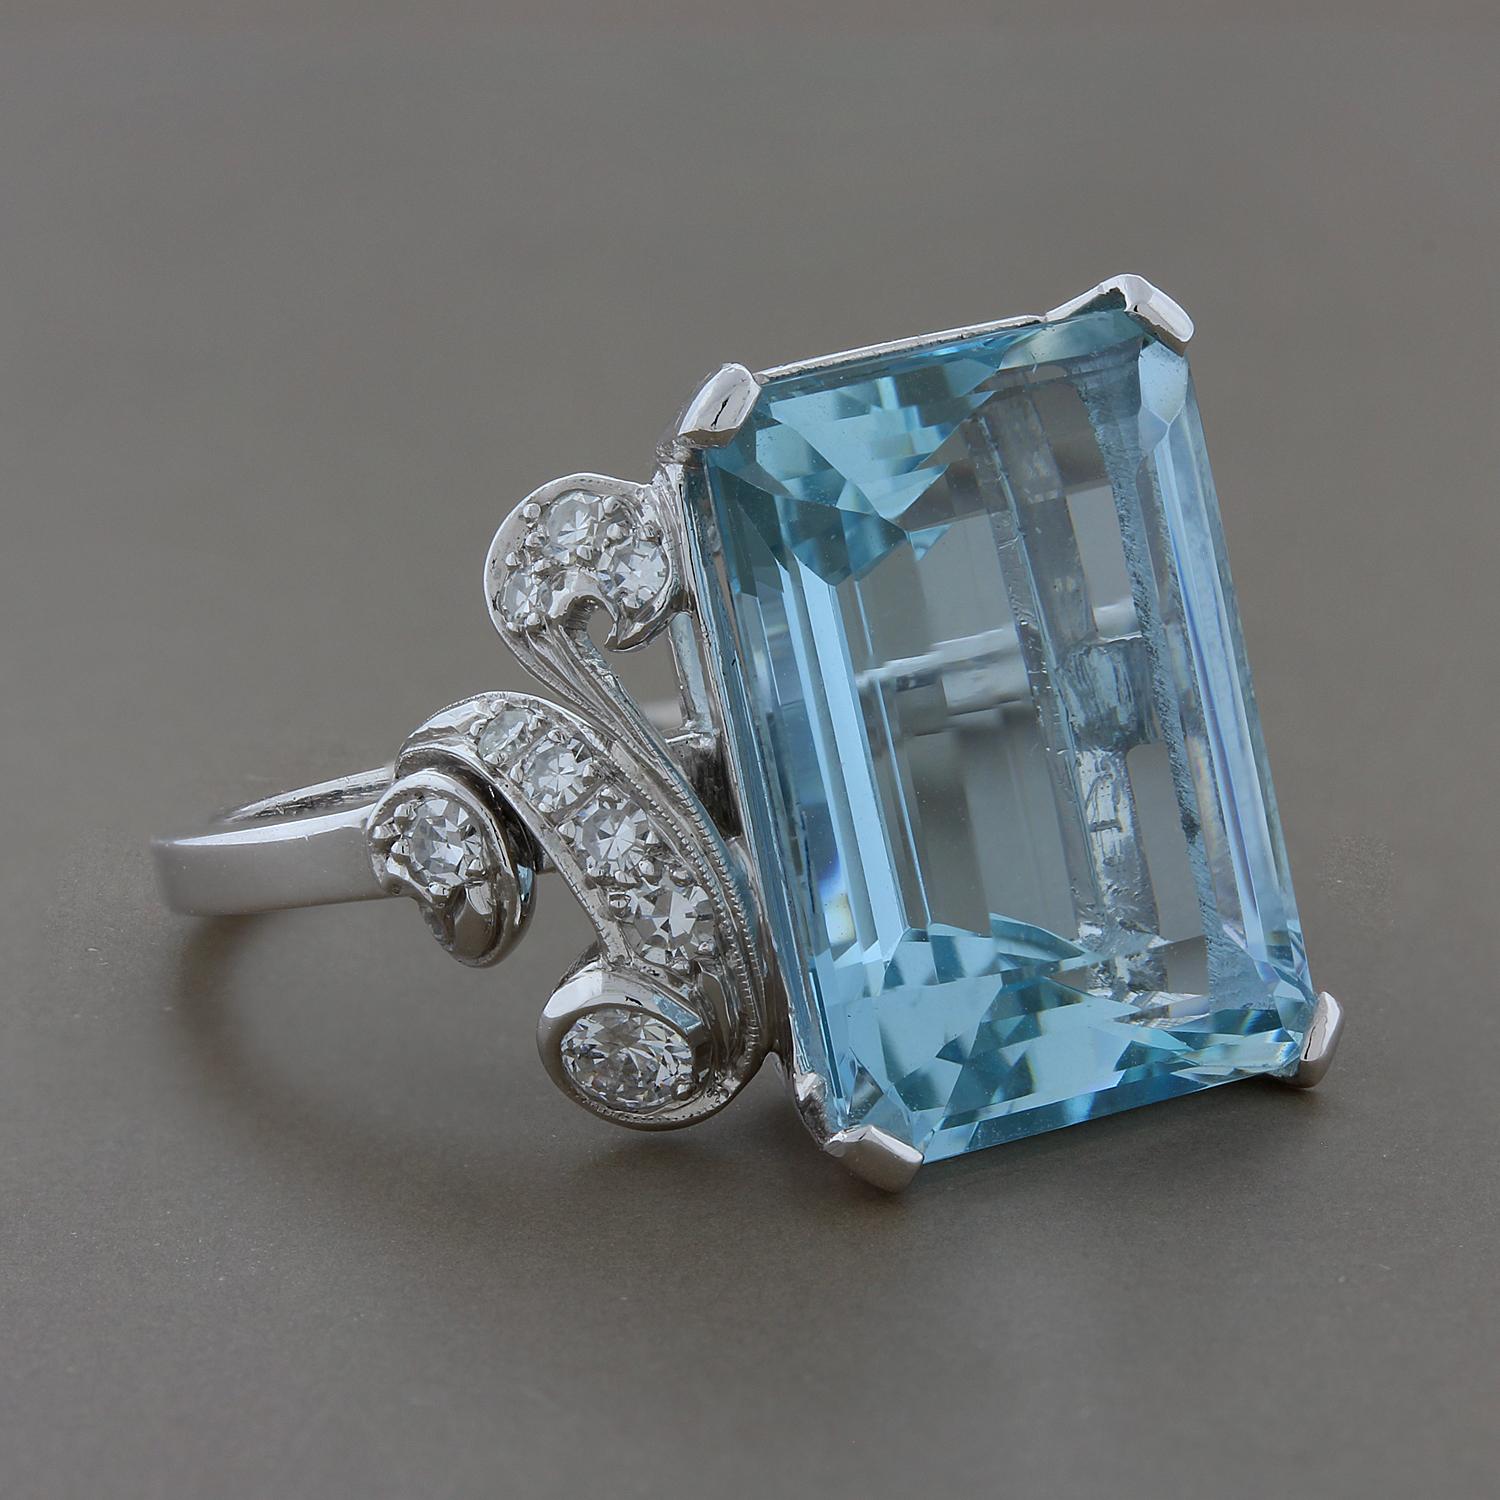 A lovely cocktail ring featuring a 12.48 carat aquamarine set in a platinum mounting. There are 0.30 carats of round cut diamonds accenting the emerald cut aquamarine, set in platinum.
Size 7 ¾ 
